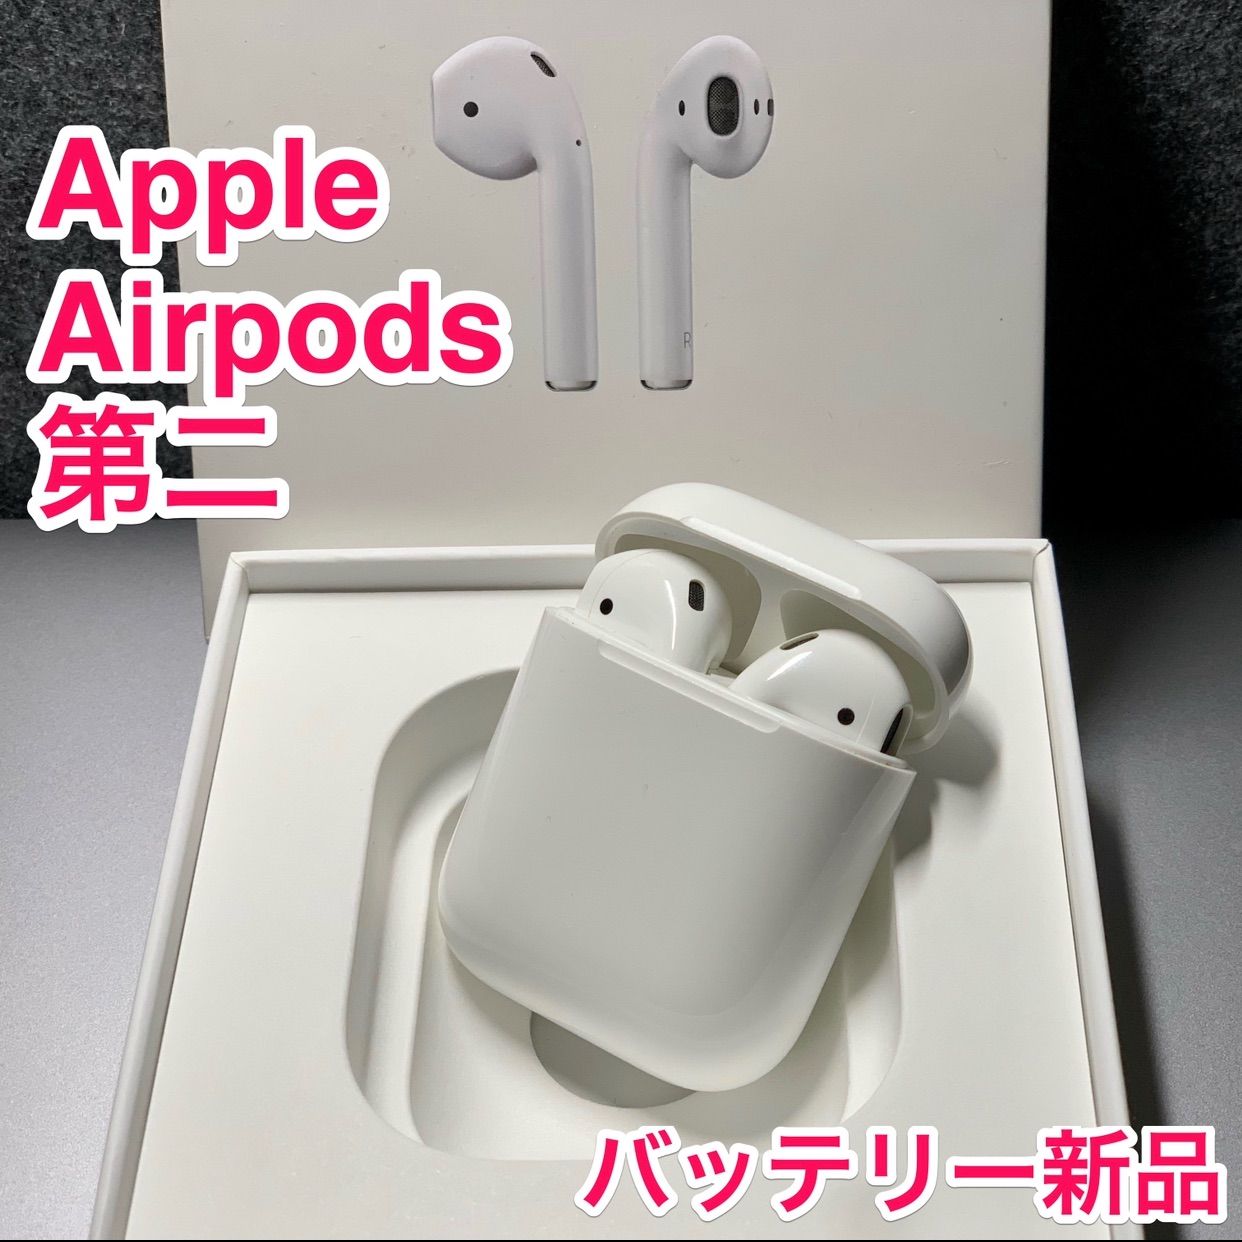 AirPods Pro 2世代 バッテリー交換済み 新着セール - イヤホン